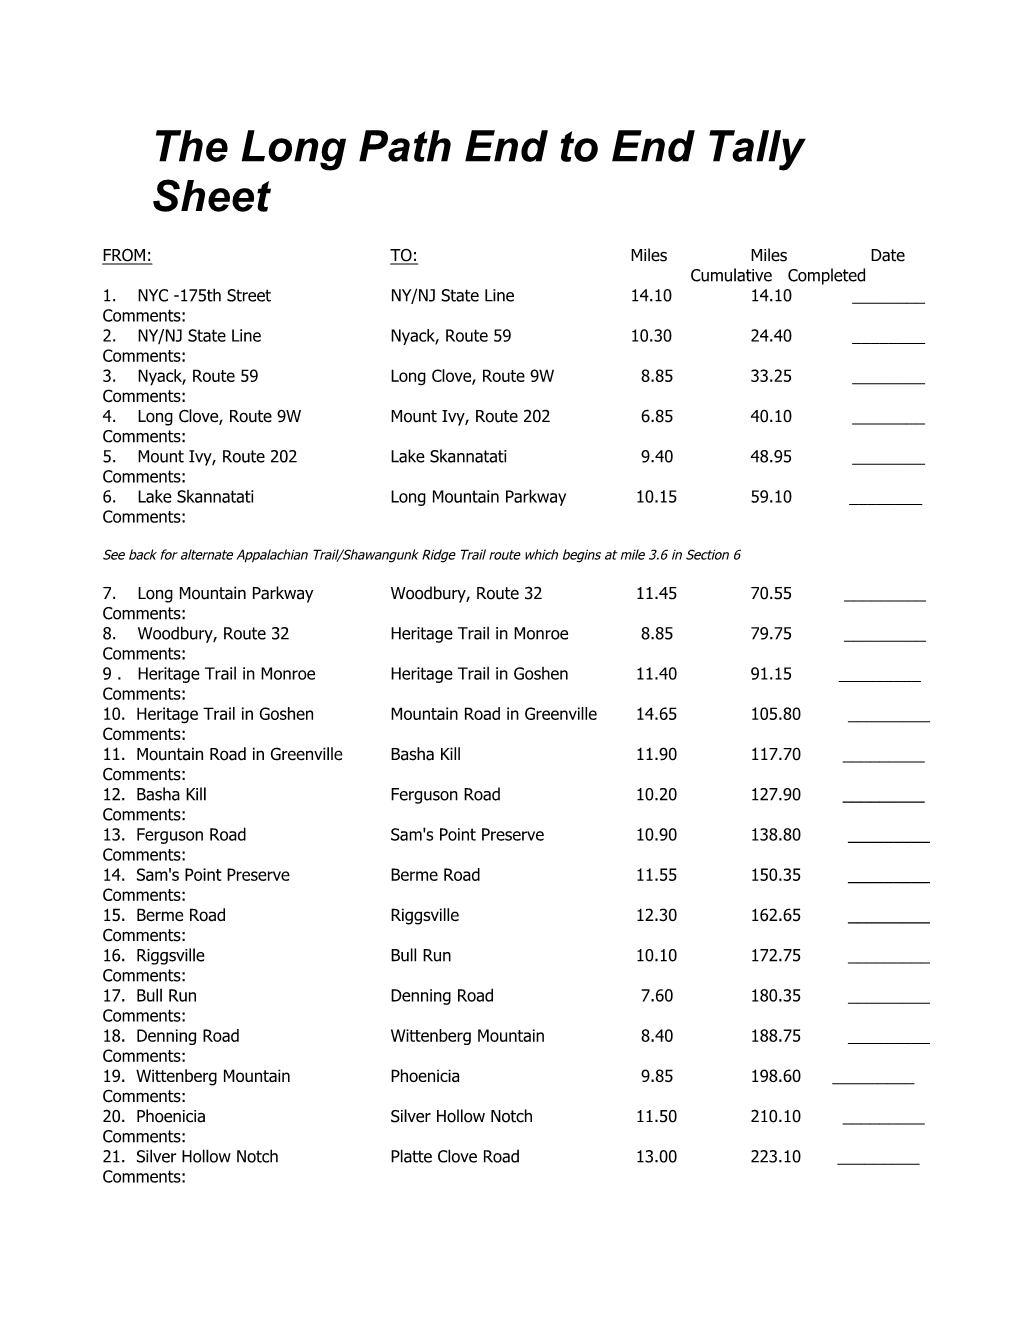 The Long Path End to End Tally Sheet